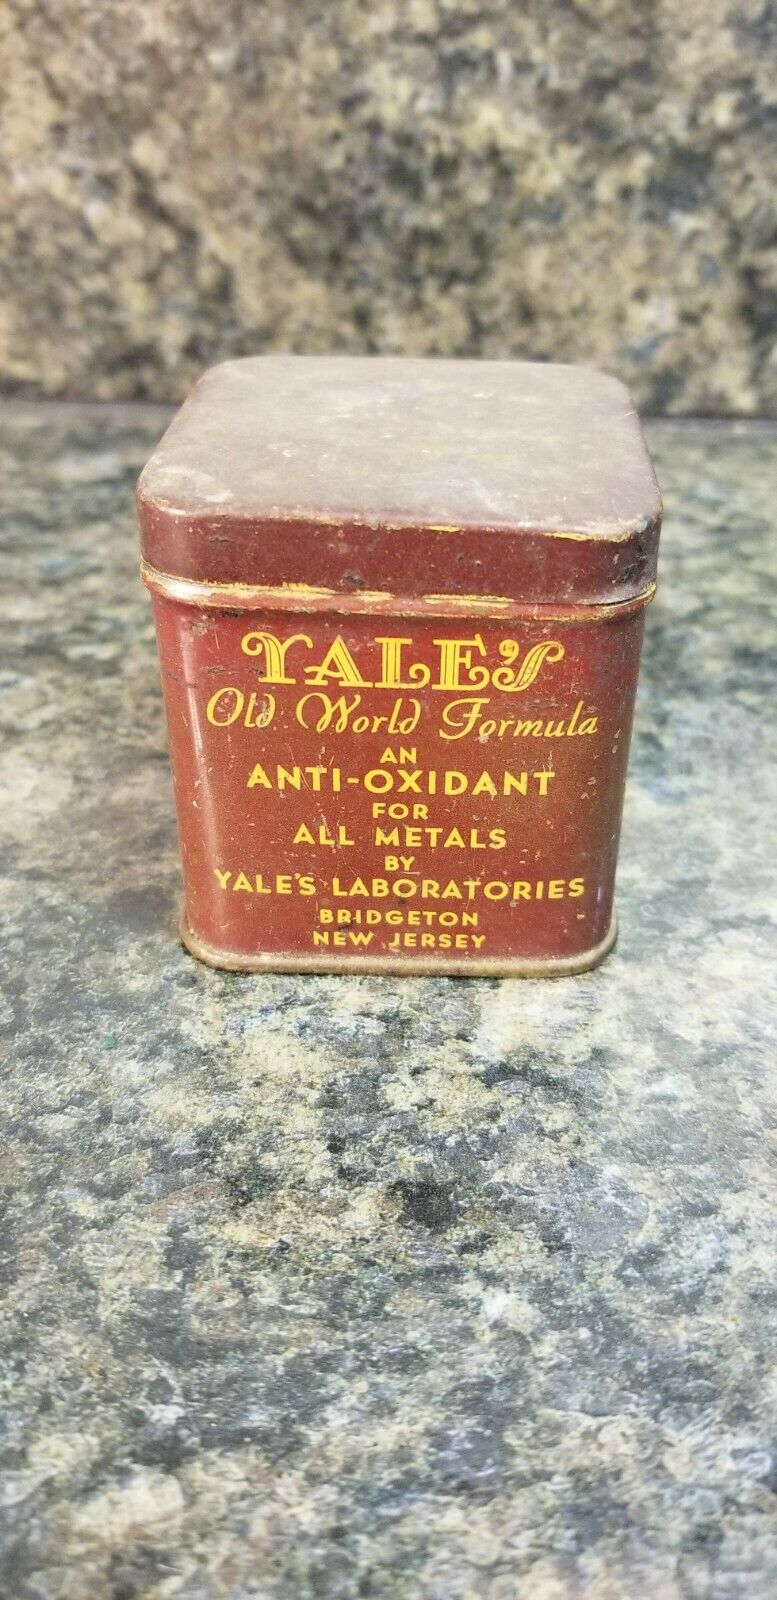 Vintage Tin Yale's Old World Formula An Anti-Oxidant for All Metals